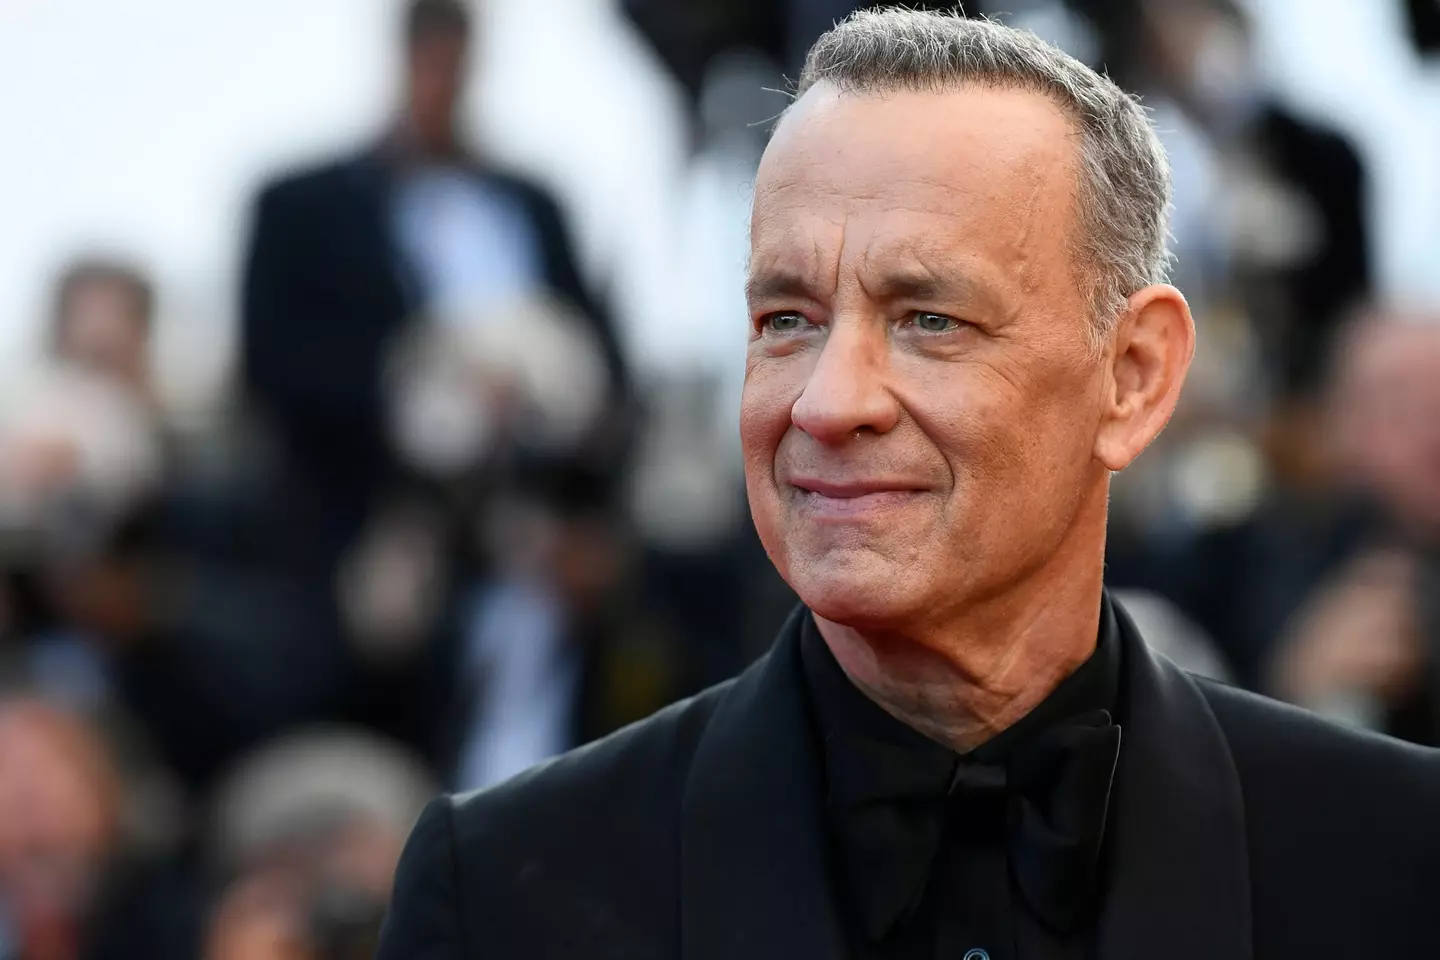 Tom Hanks has revealed what helped him write his debut novel.